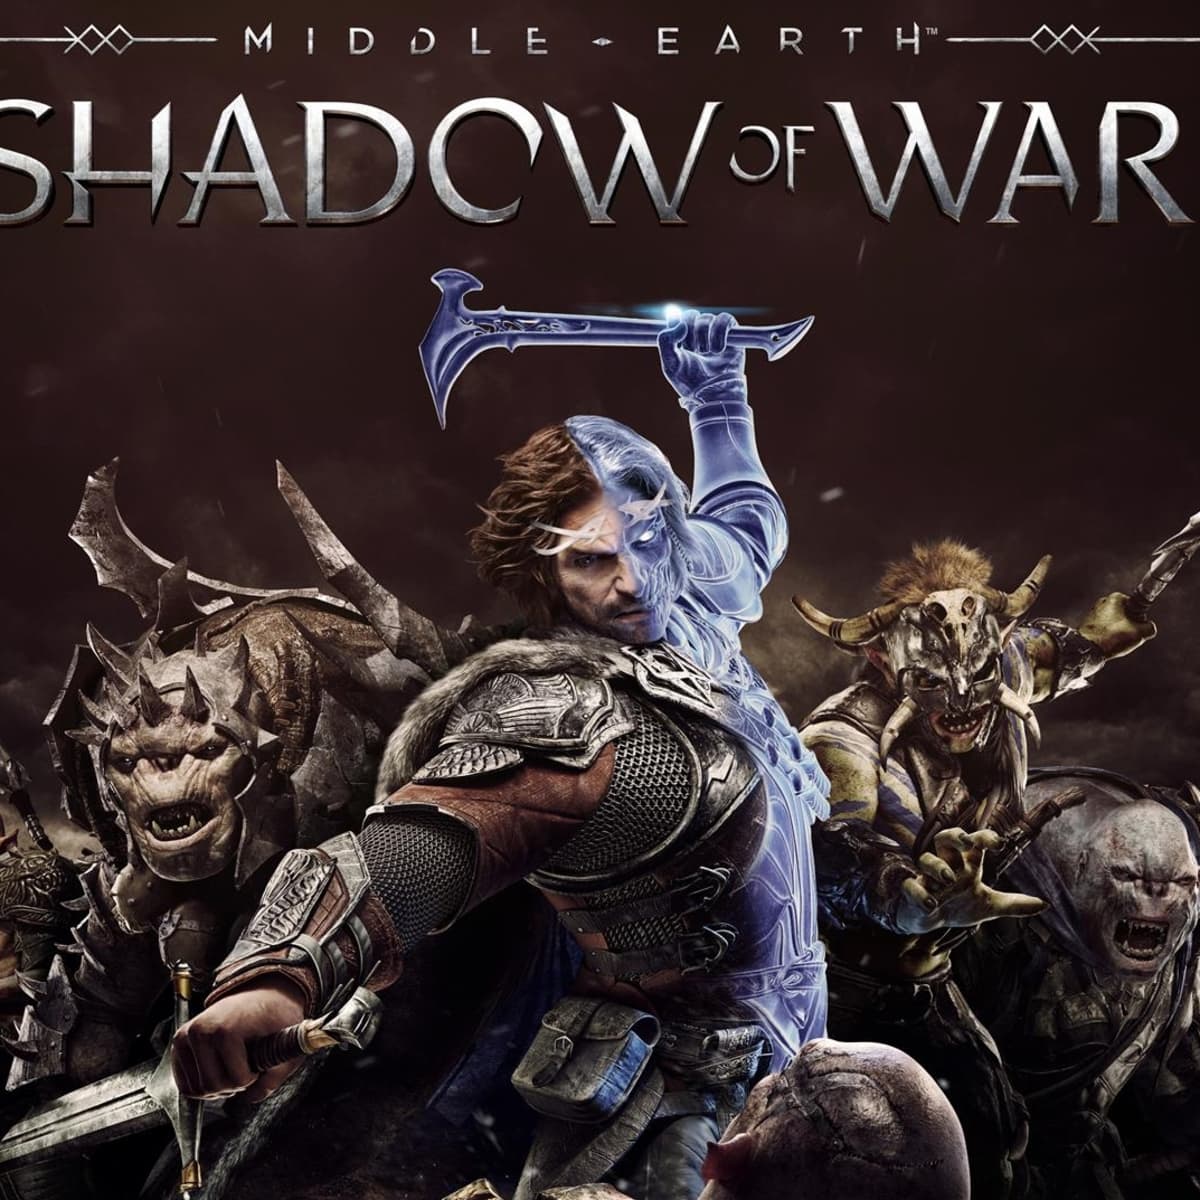 Middle-Earth: Shadow Of War' Shadow Wars Guide